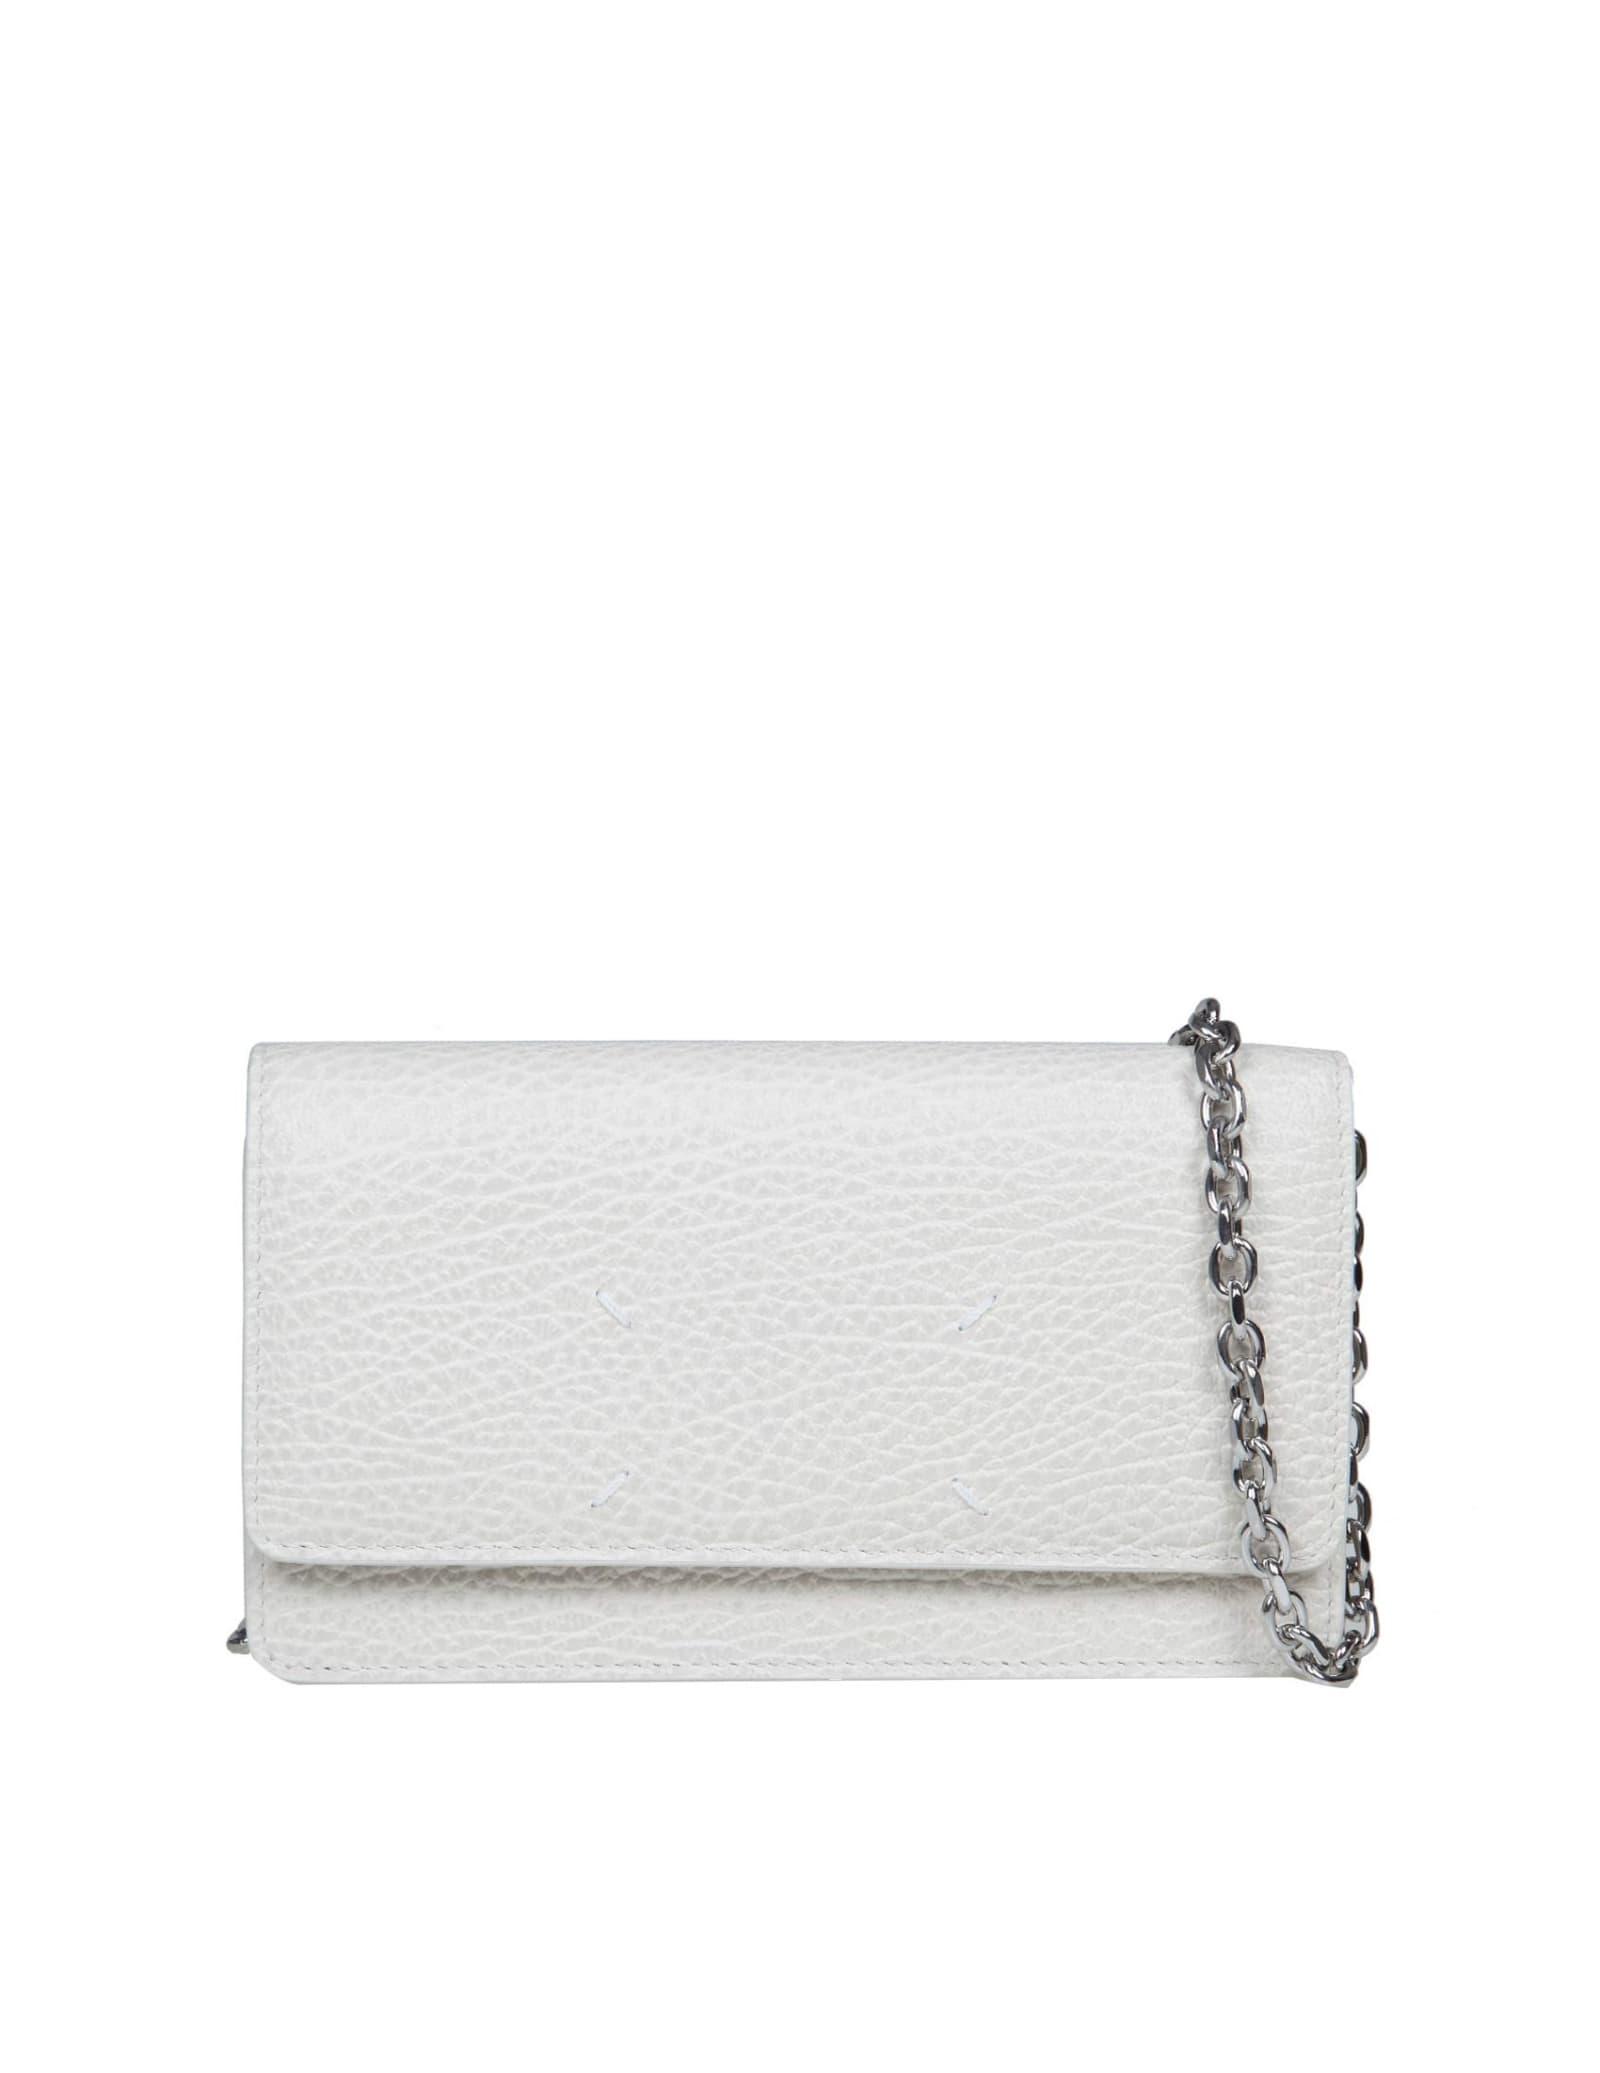 Maison Margiela Mini Chain Bag In Ice Color Leather in White | Lyst